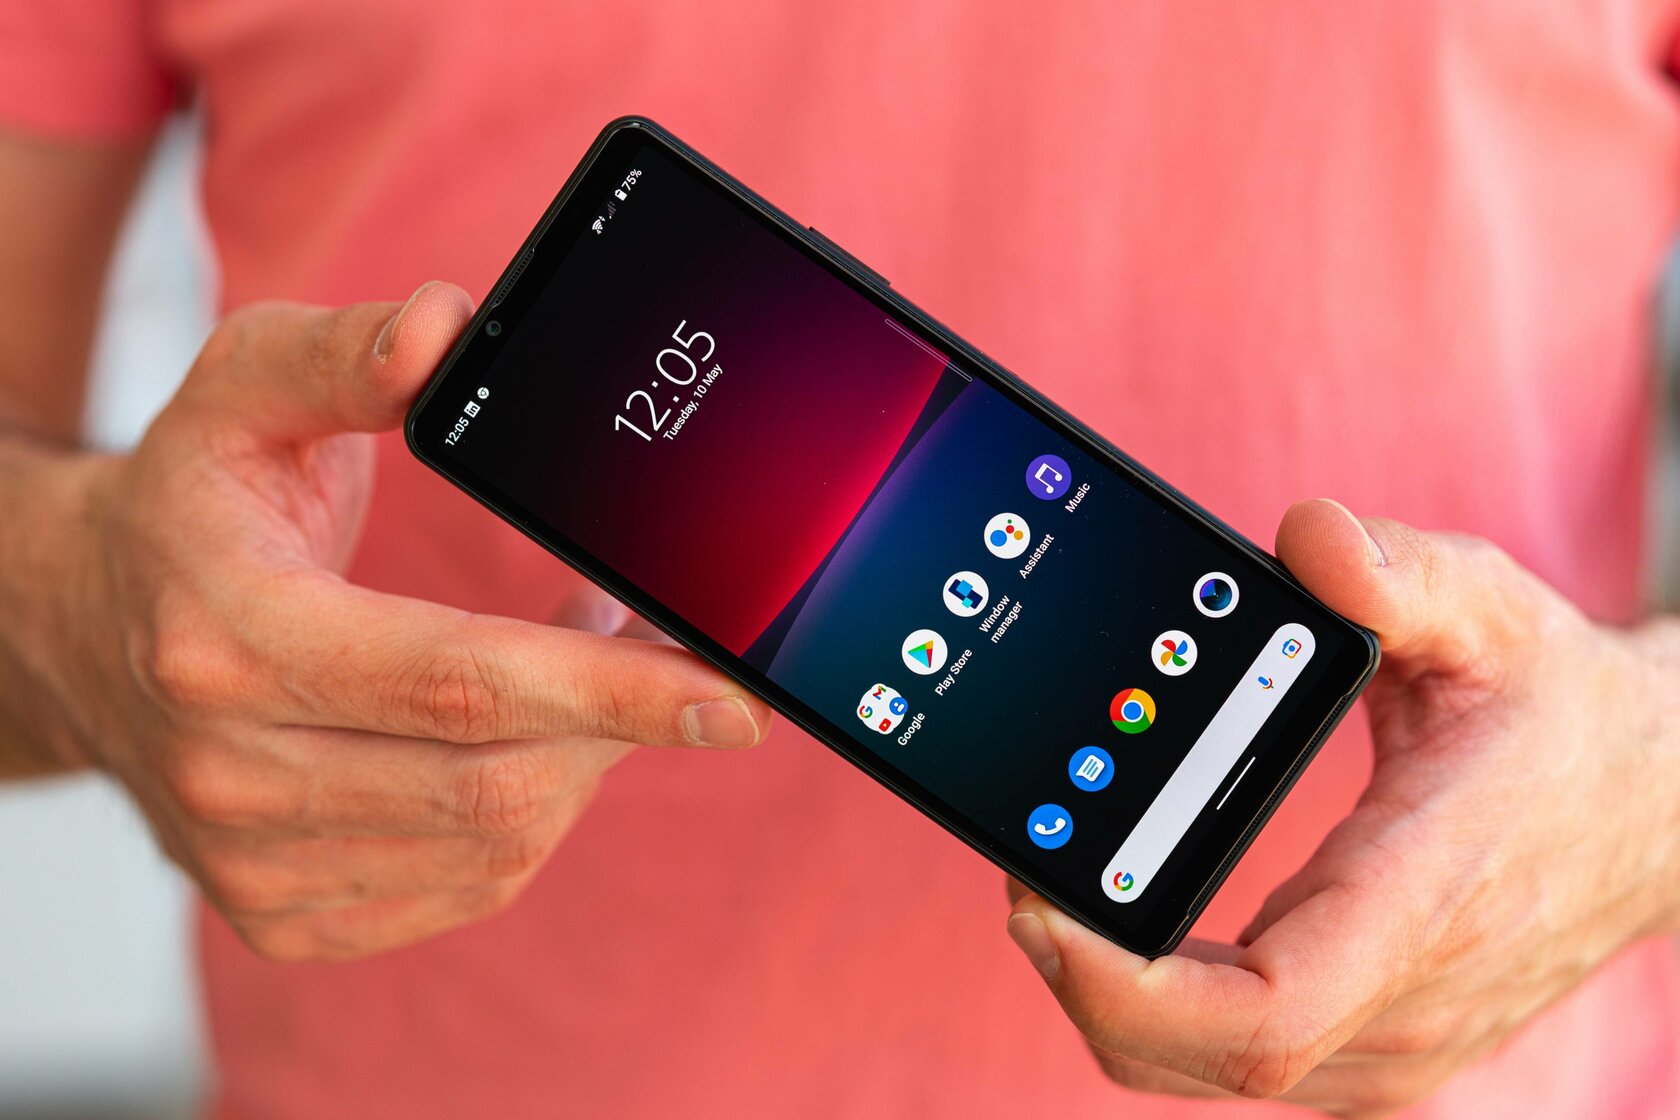 Xperia 10 6. Sony Xperia 10. Sony Xperia 10 IV 5g. Sony Xperia 10 IV Review. Sony Xperia 1 IV.